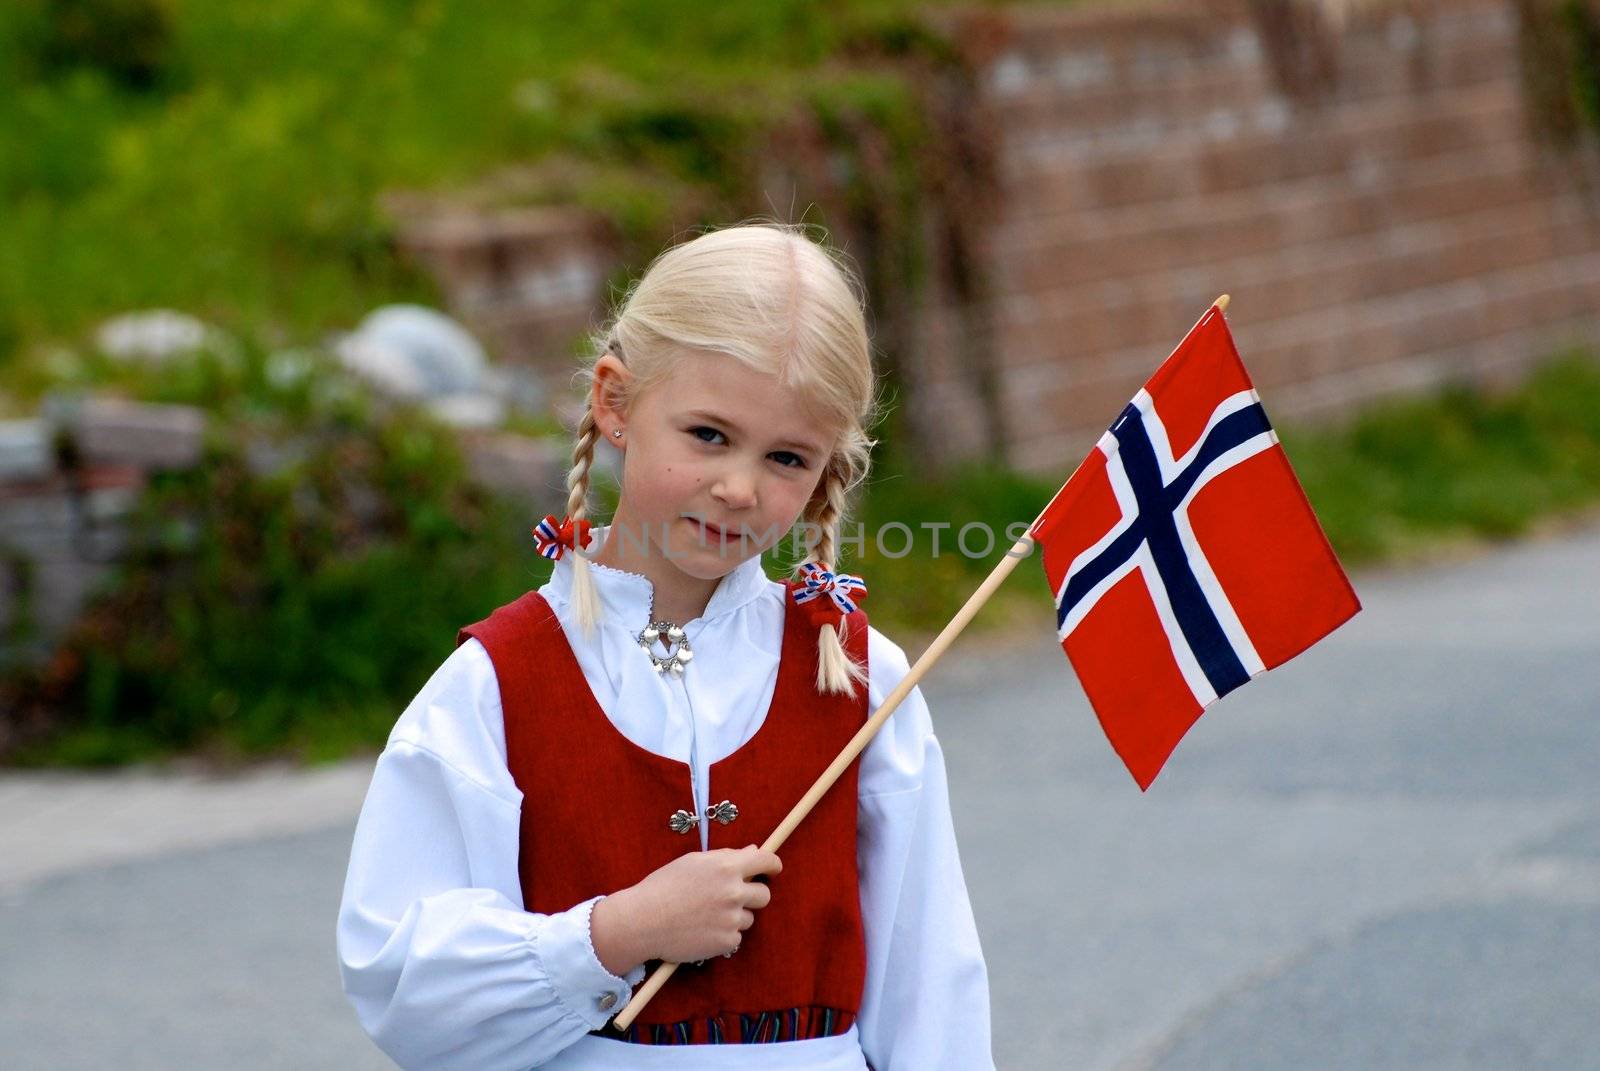 a little girl with national flag of Norway. Please note: No negative use allowed.